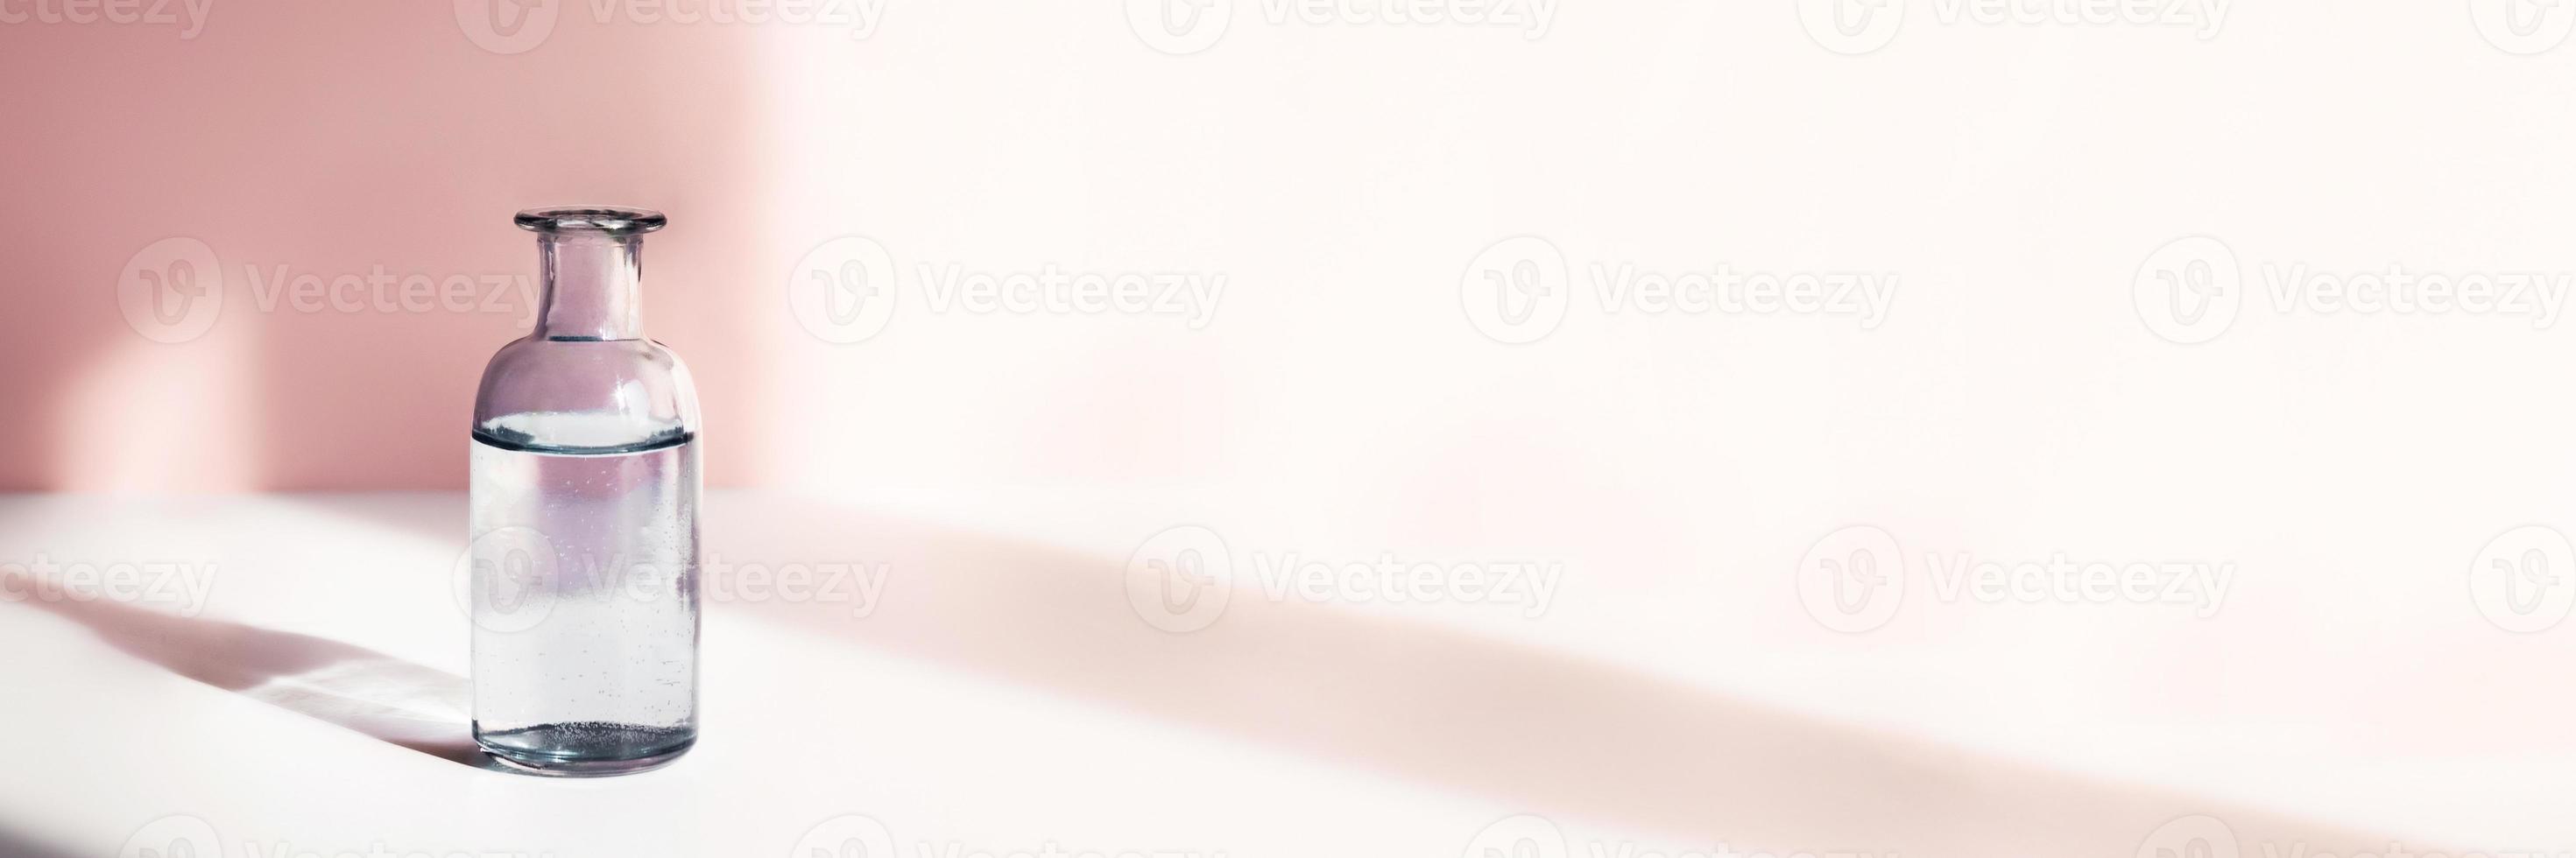 Glass vase with water for flowers in sunlight on pink background. Cute web banner in pastel-colored with place for text. photo